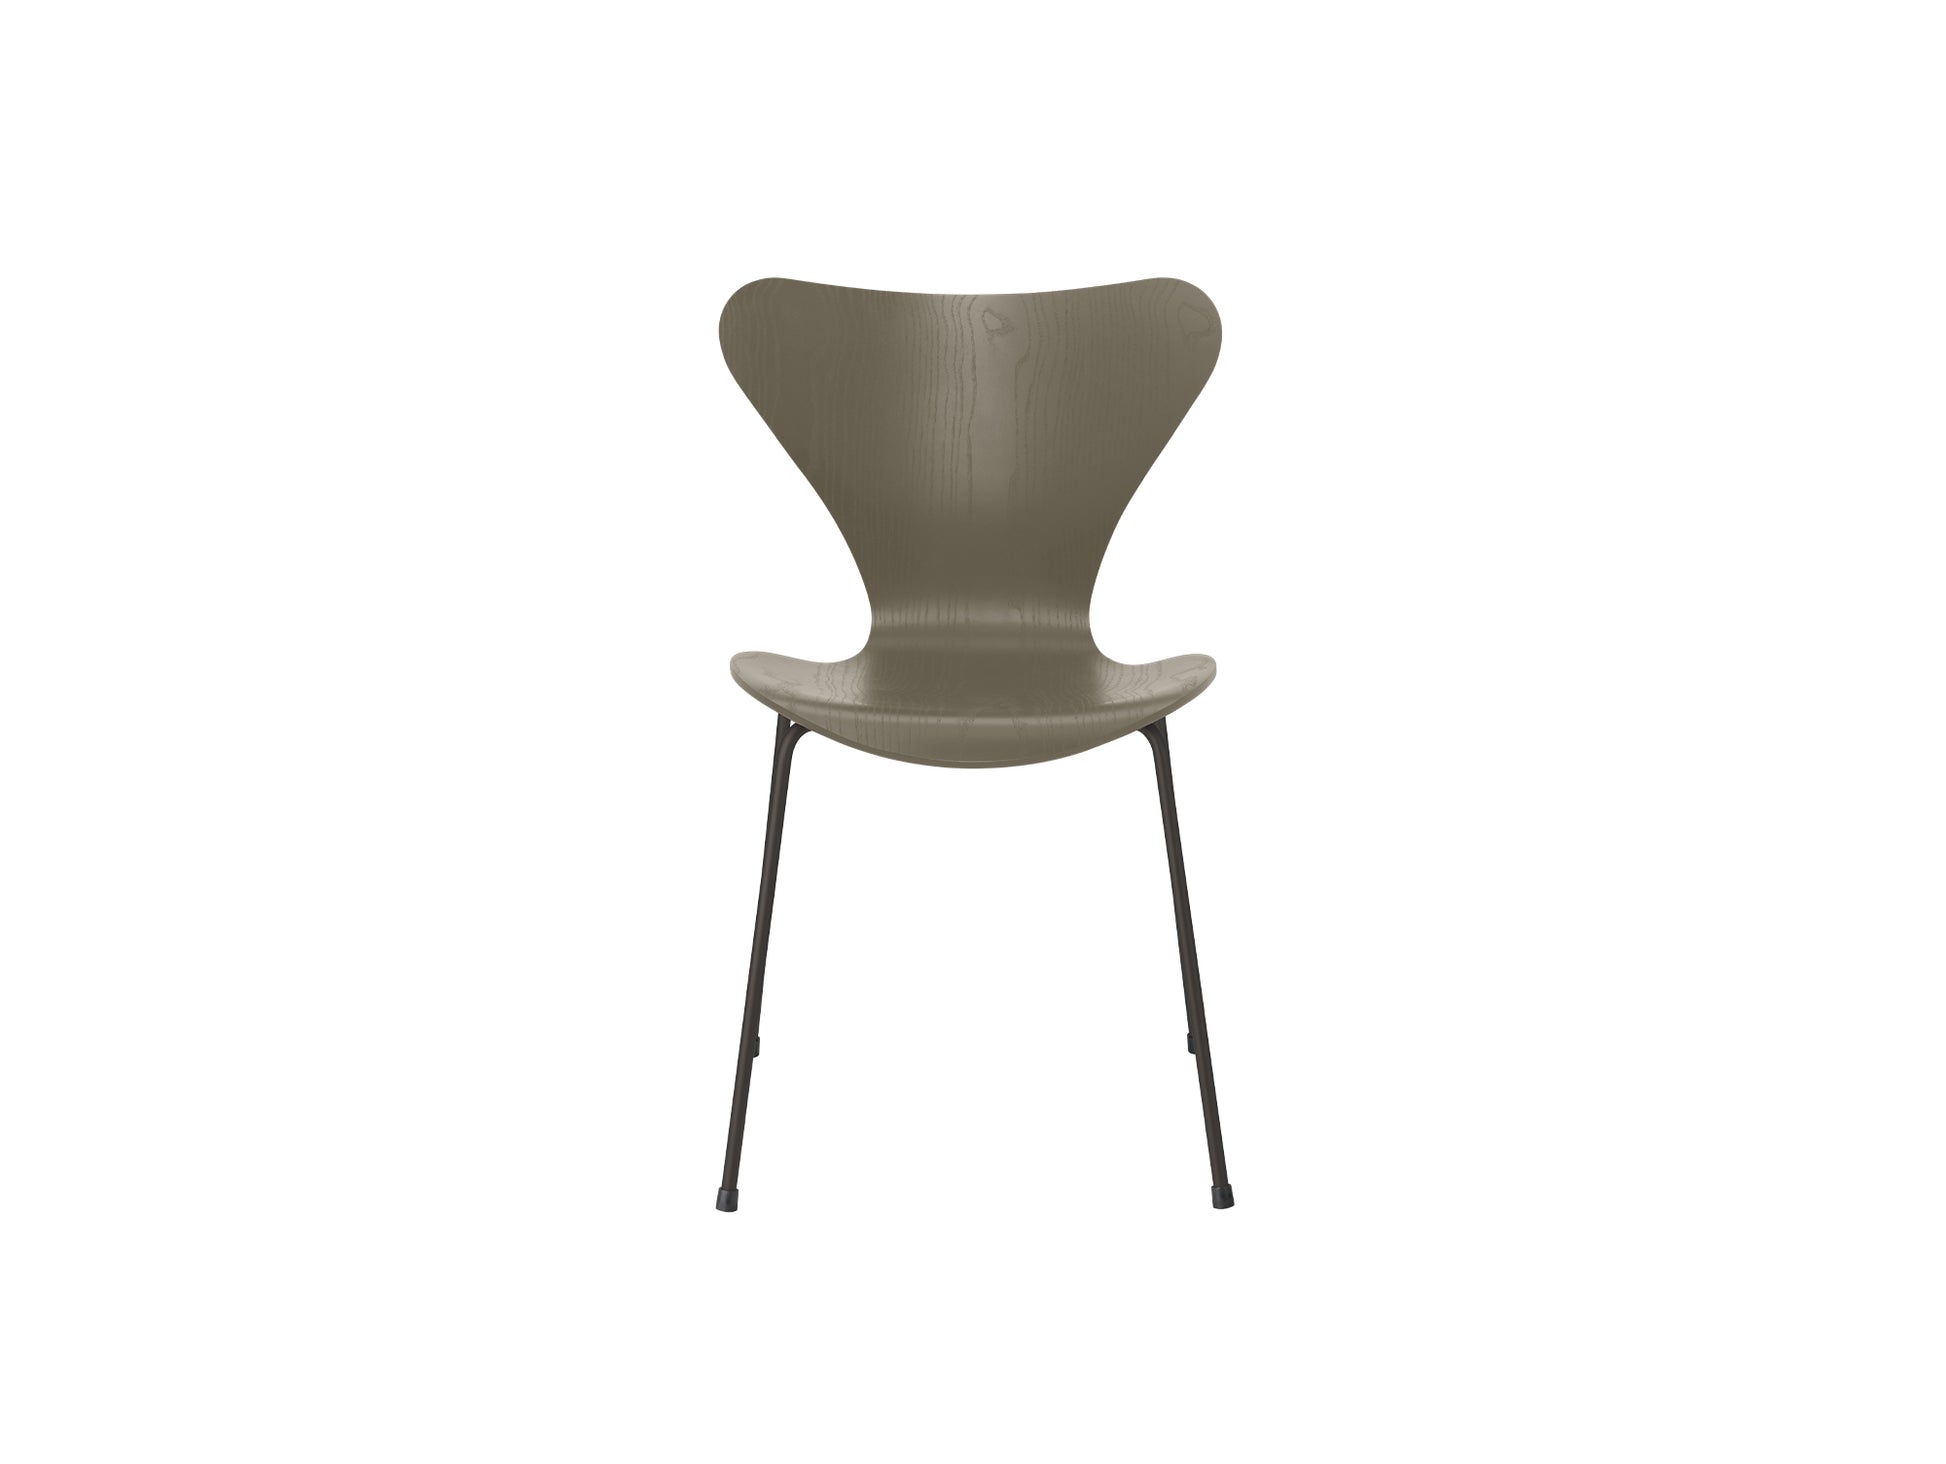 Series 7™ 3107 Dining Chair by Fritz Hansen - Olive Green Coloured Ash Veneer Shell / Warm Graphite Steel